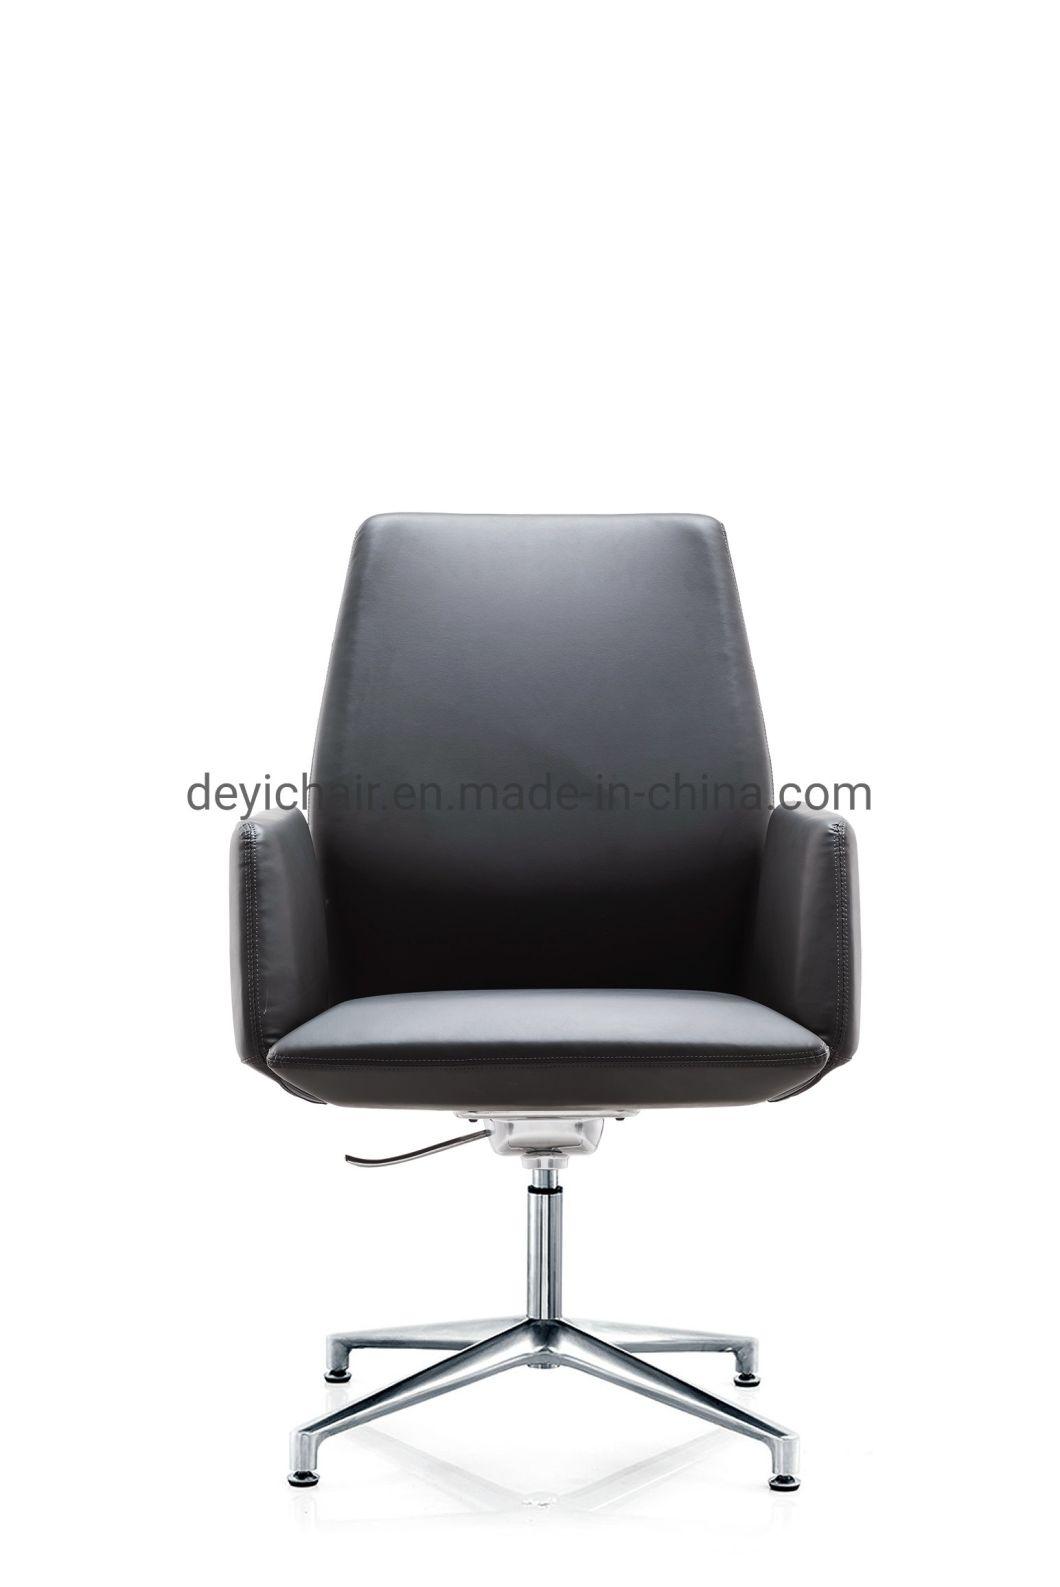 Aluminum Base Fixed Glider PU / Leather Upholstery up and Down Mechanism for Seat and Back Seat Conference Chair